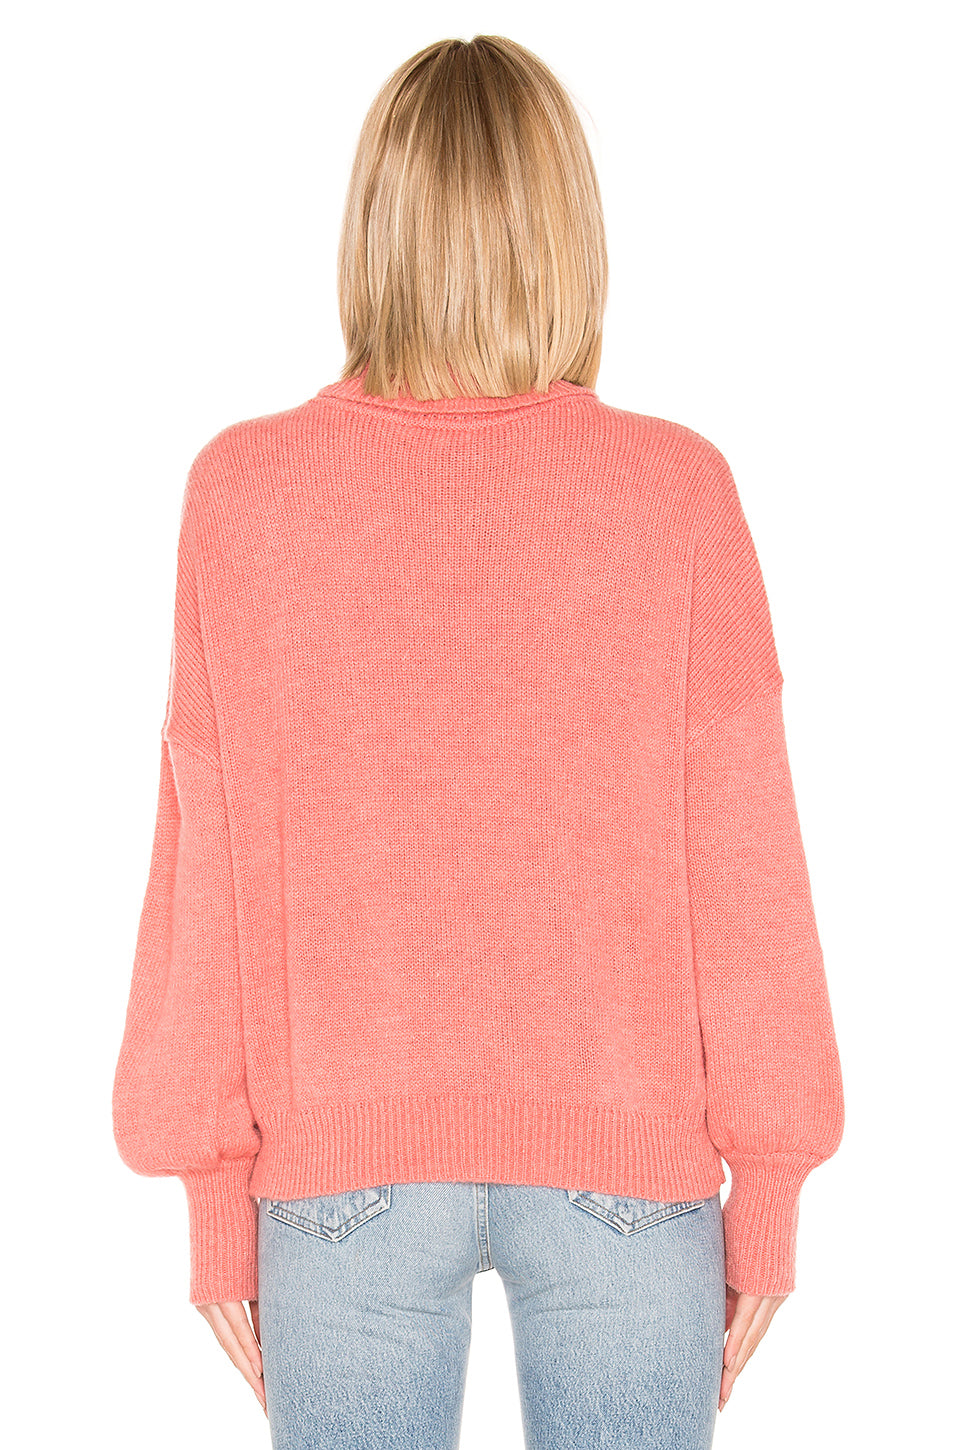 Cove Turtleneck in DUSTY PINK